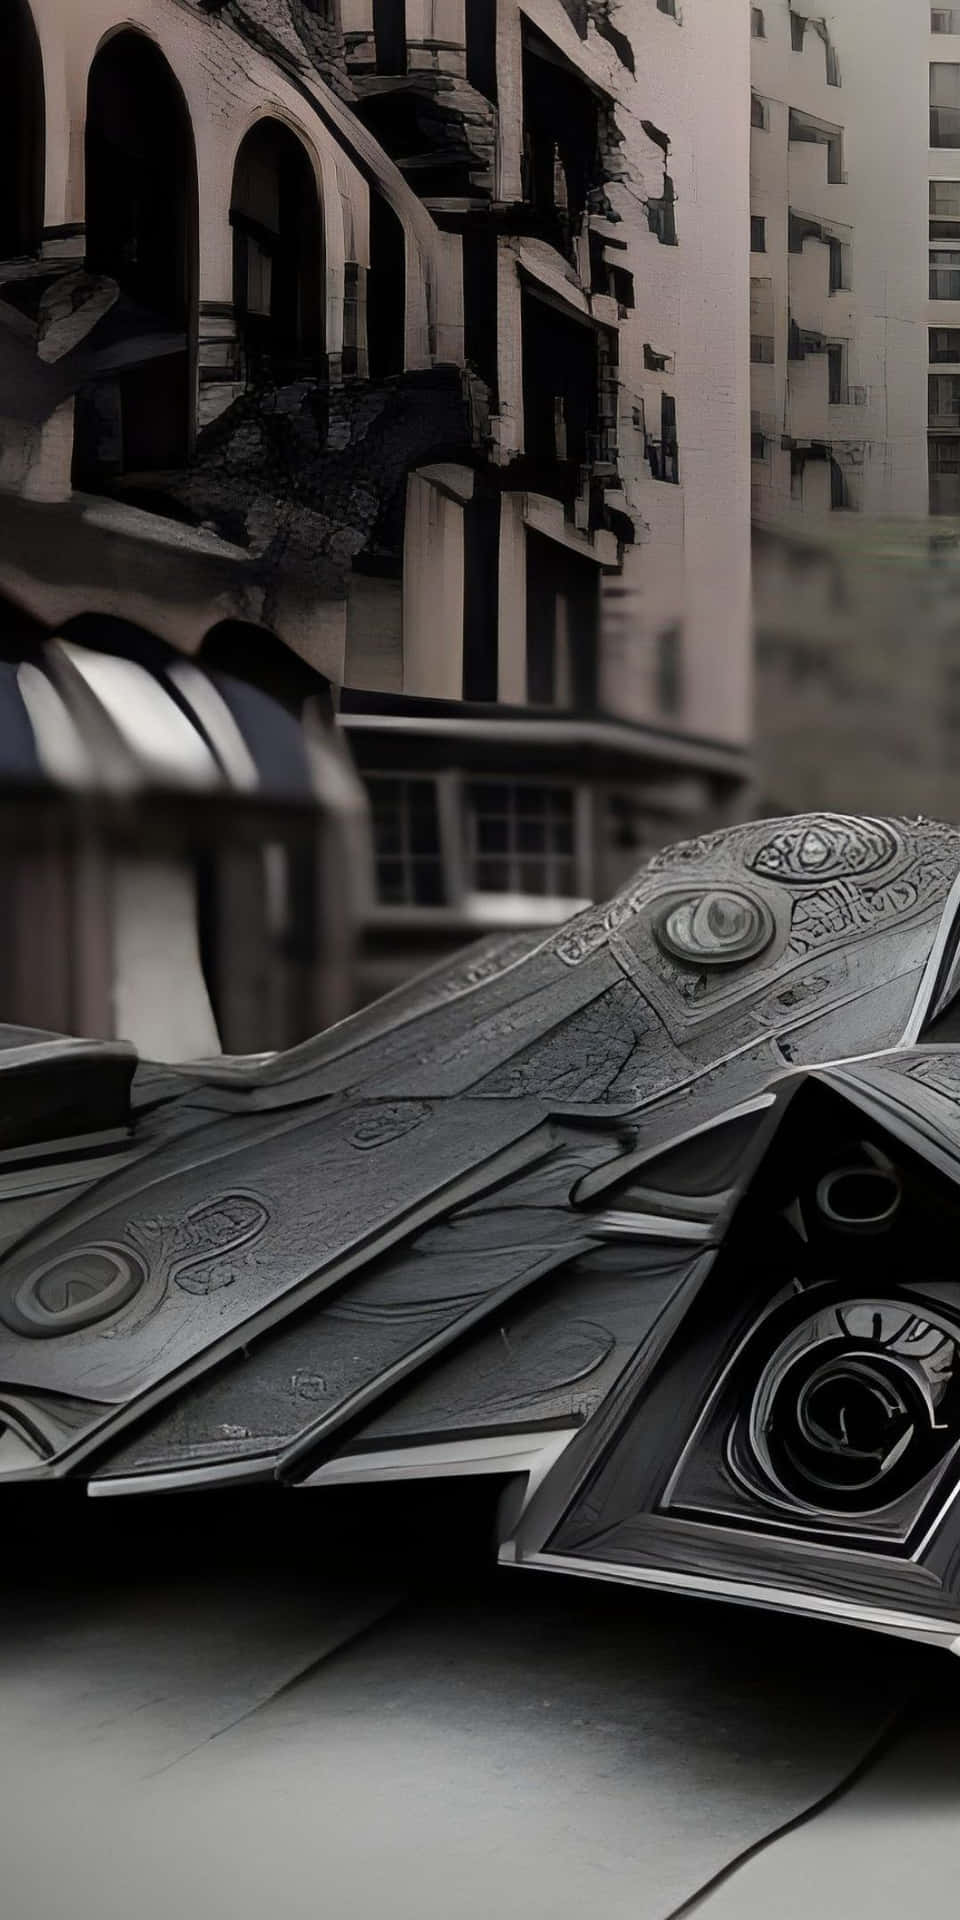 Drive Batman's signature vehicle, the Batmobile, in your own hands